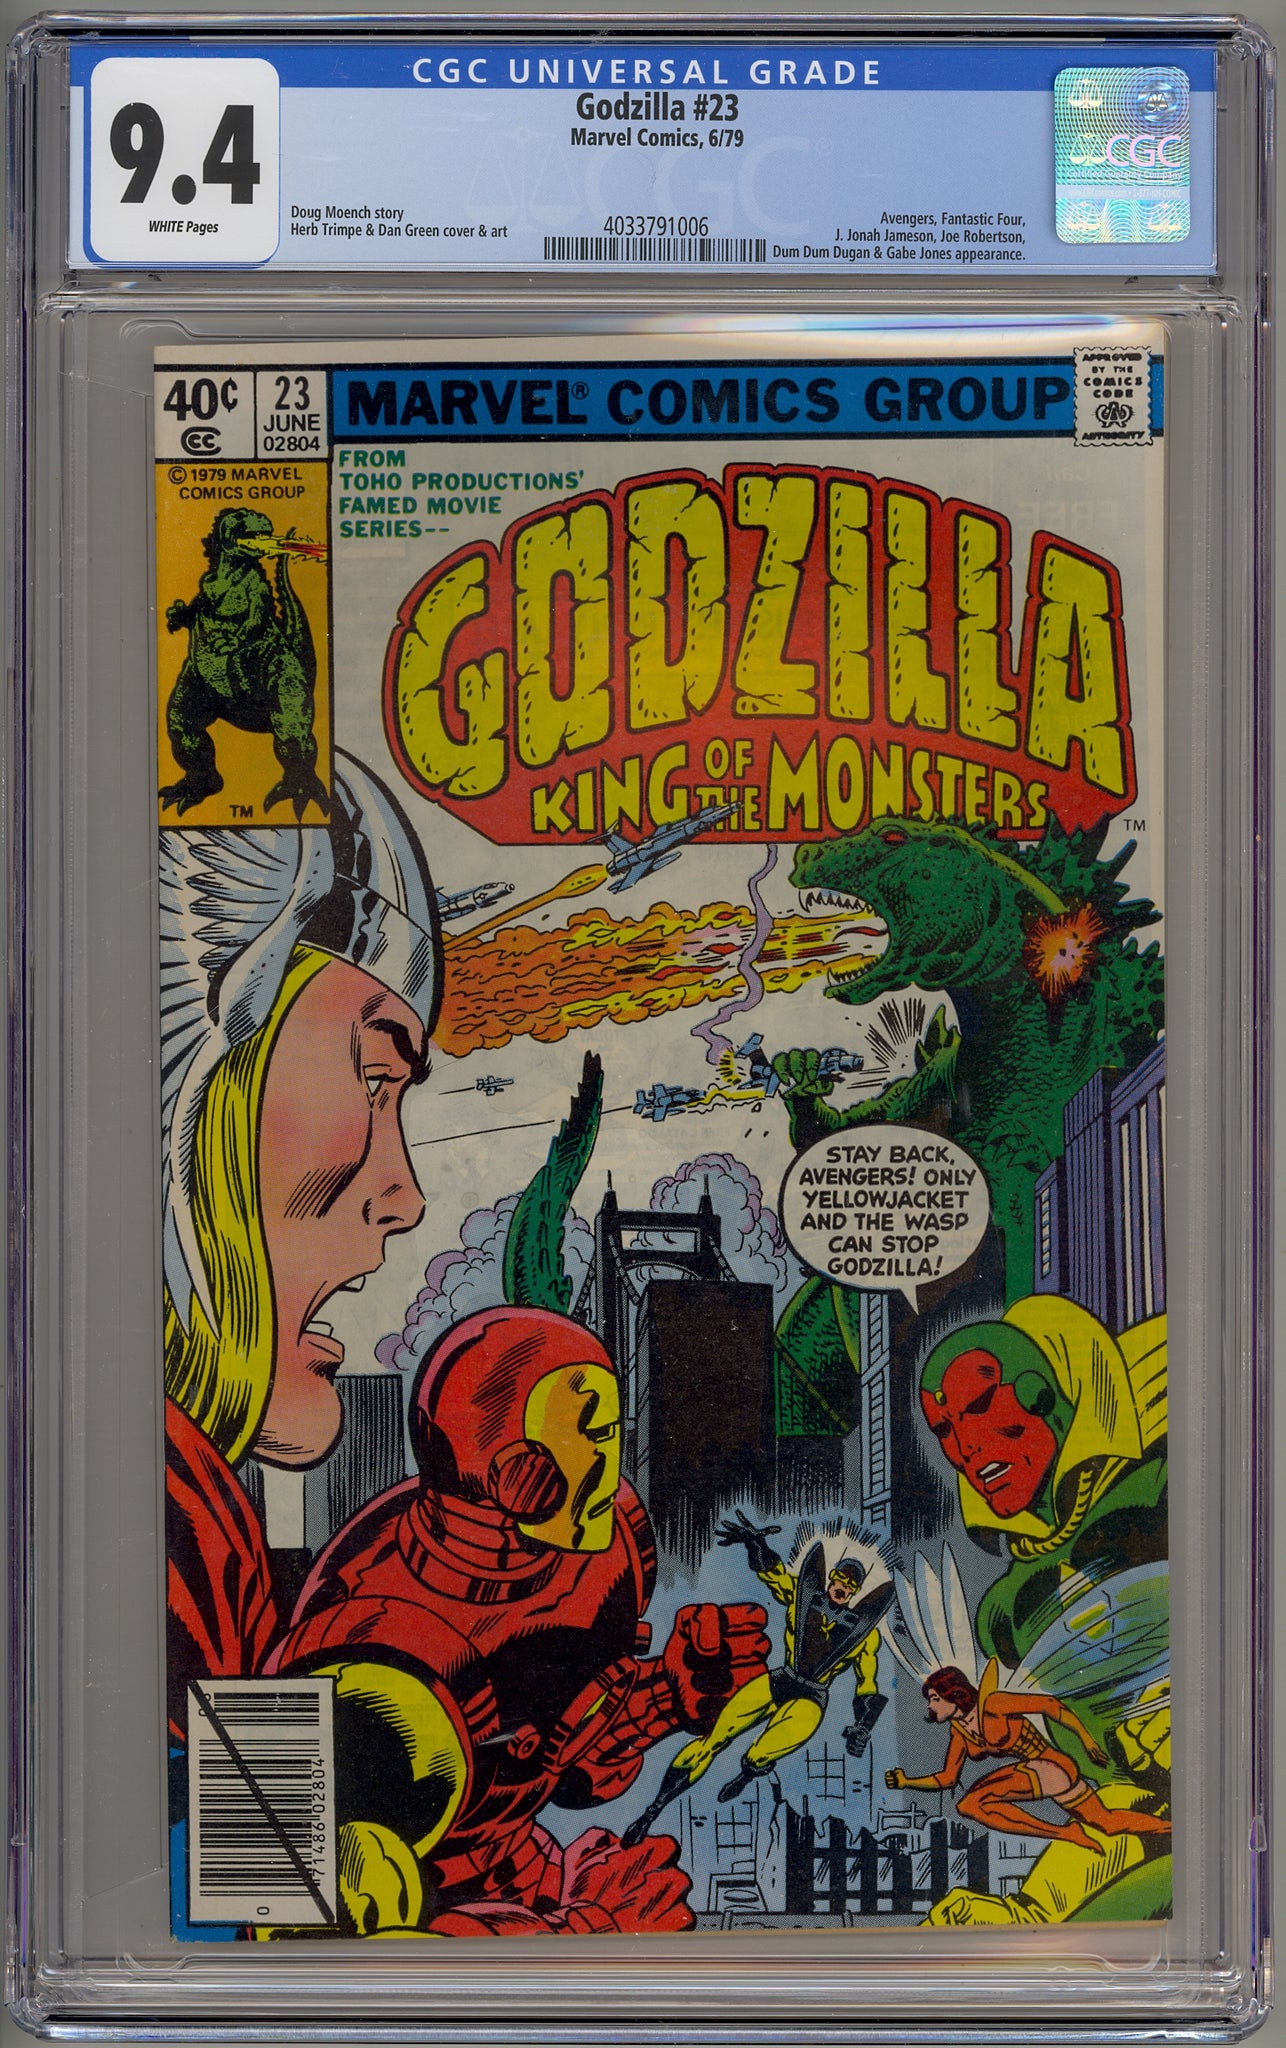 Godzilla, King of the Monsters #23 (1979) Avengers, Fantastic Four